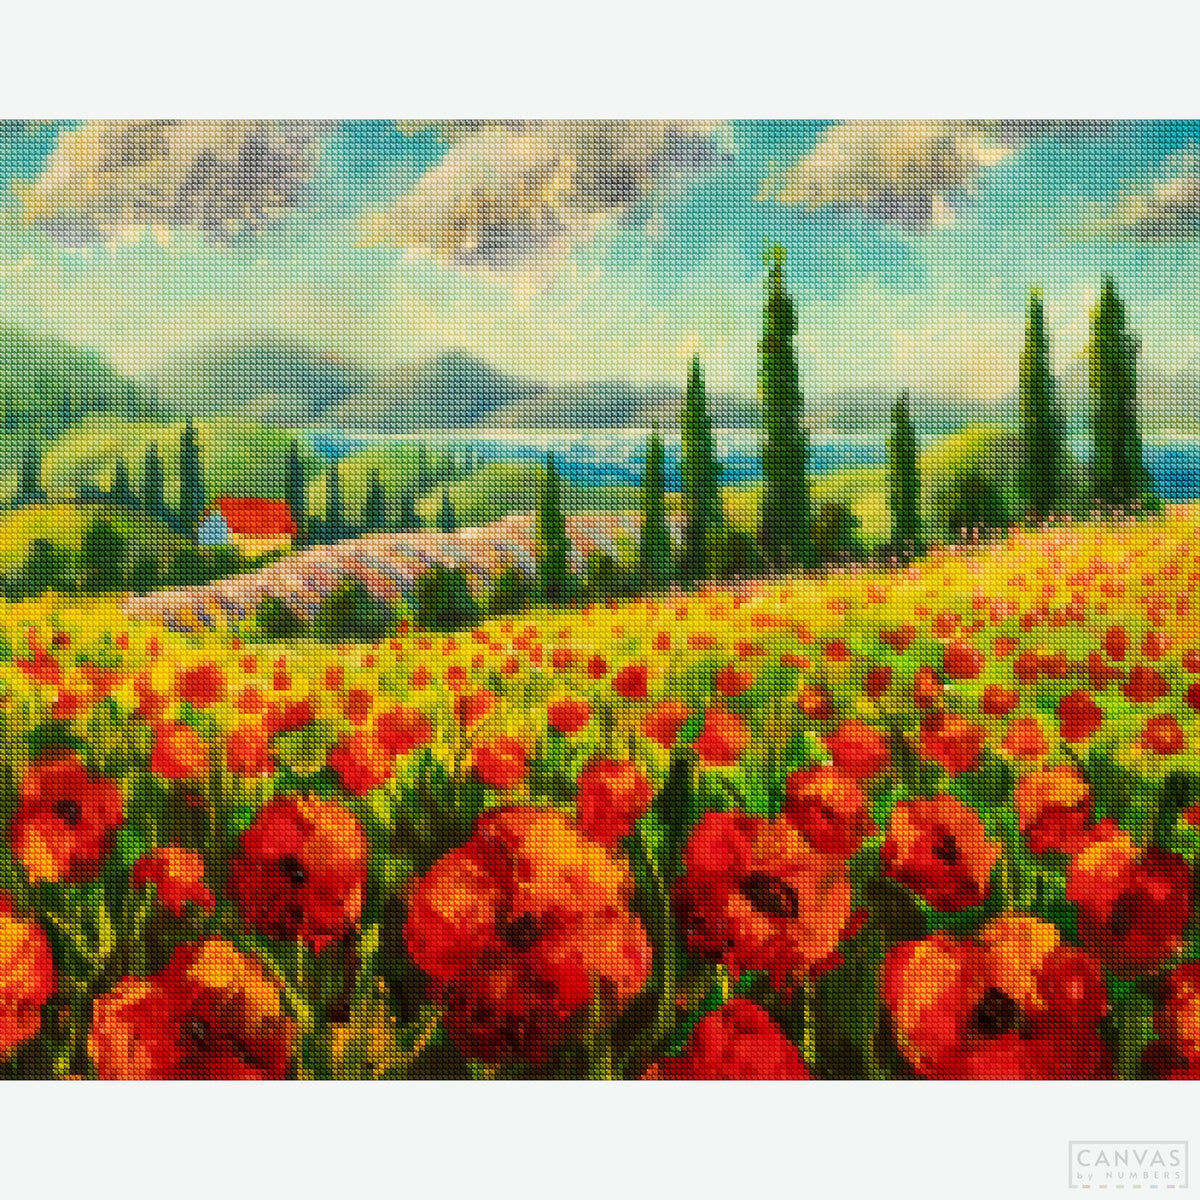 Tuscany Landscape - Diamond Painting-A colorful poppy field under the blue sky - this paint by numbers is a joy to paint! Discover exclusive Boyan's art at Canvas by Numbers. Ships from the US.-Canvas by Numbers